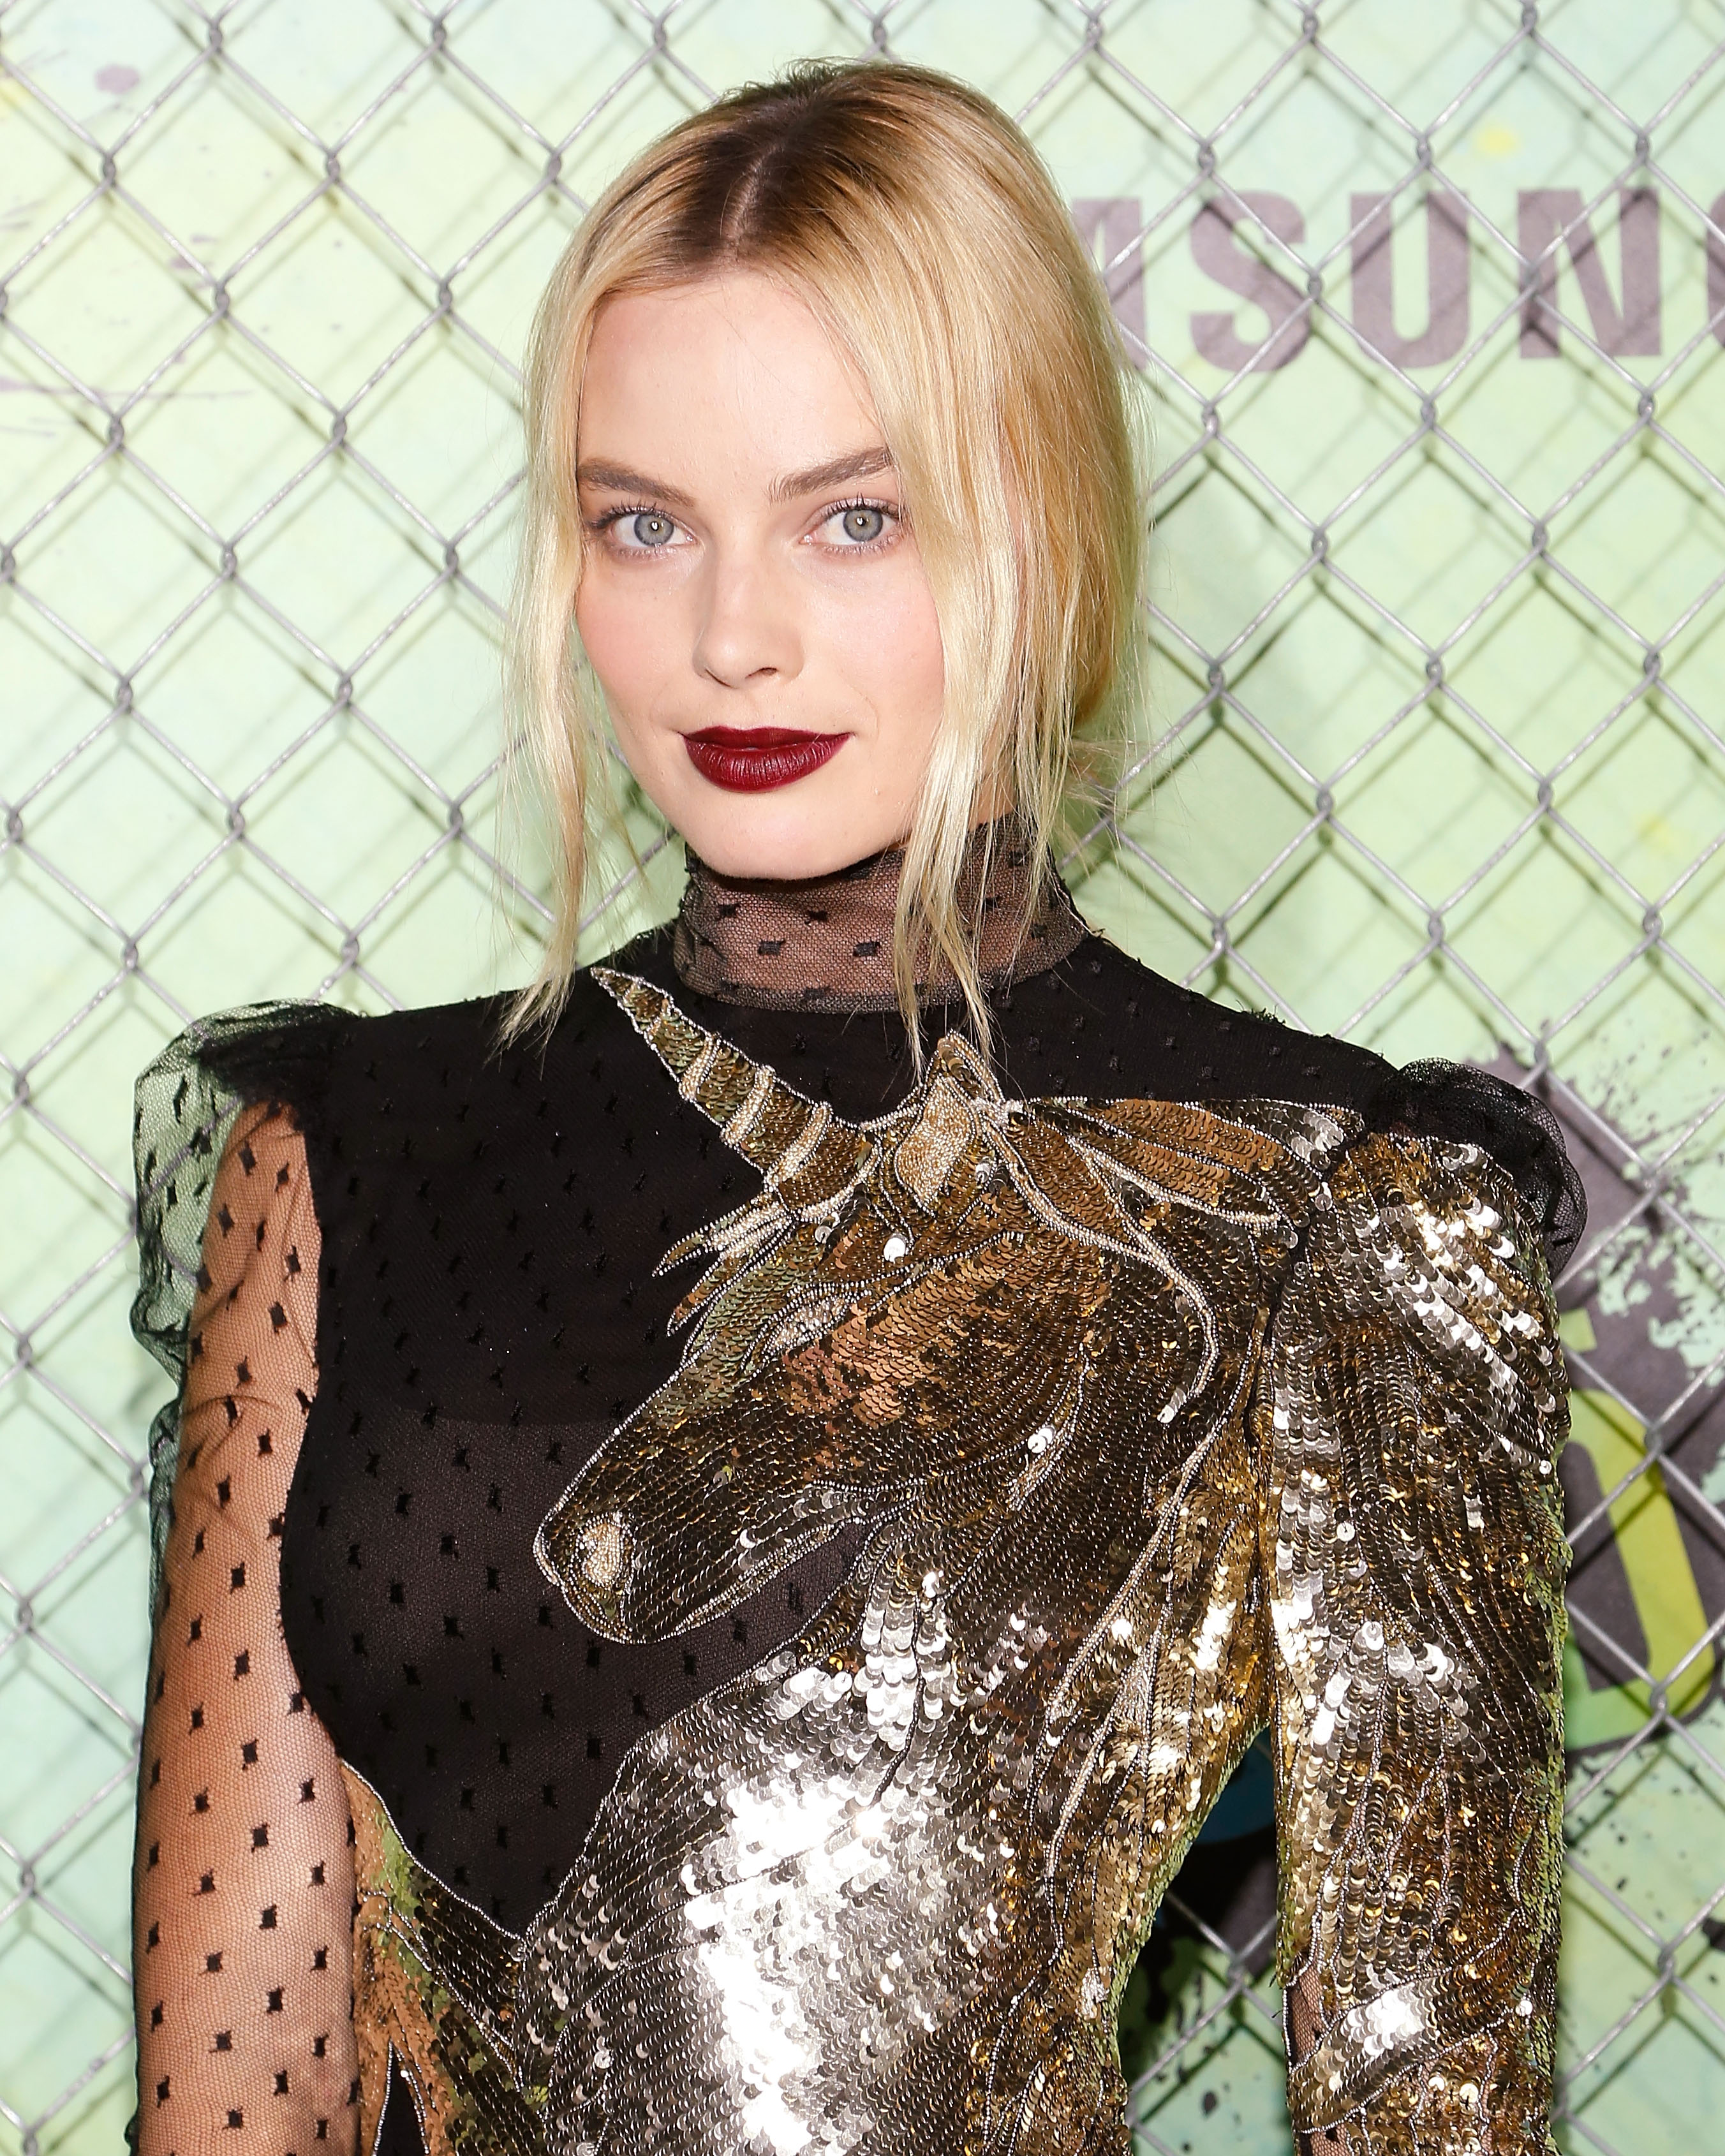 Margot Robbie attends the world premiere of "Suicide Squad" on August 1, 2016 in New York City. (Taylor Hill—FilmMagic/Getty Images)